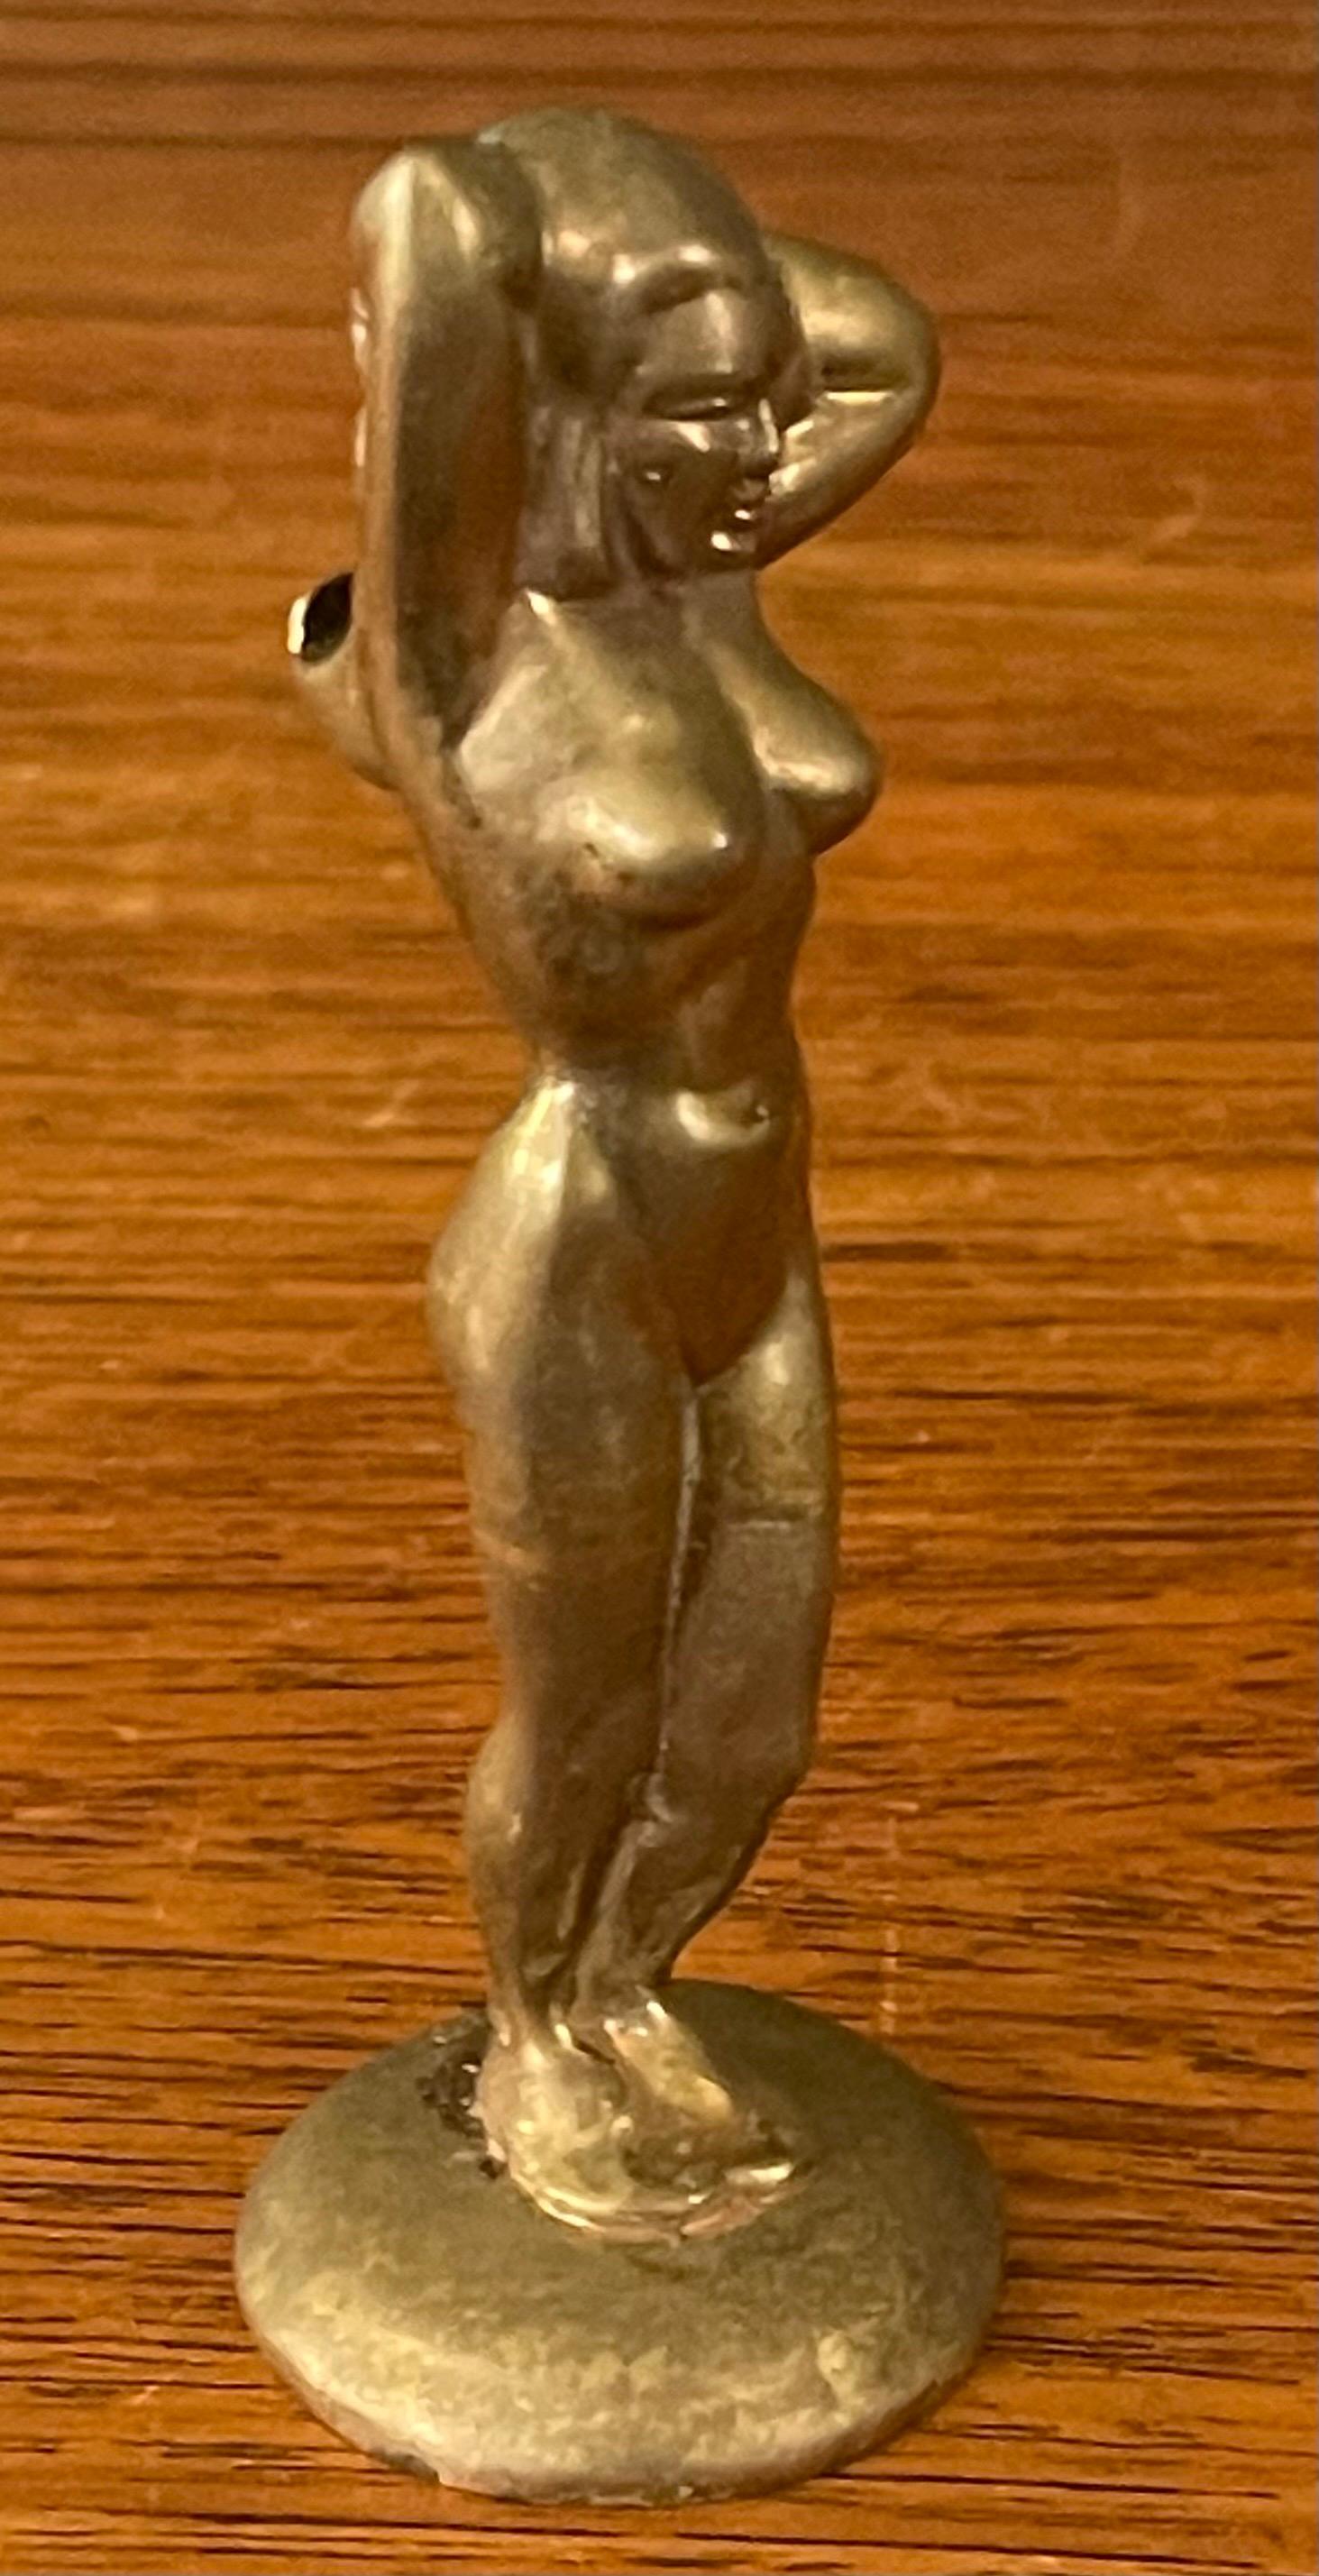 A fun brass art deco nude woman bottle opener, circa 1940s. The piece is in very good vintage condition with a great patina and measures 1.5